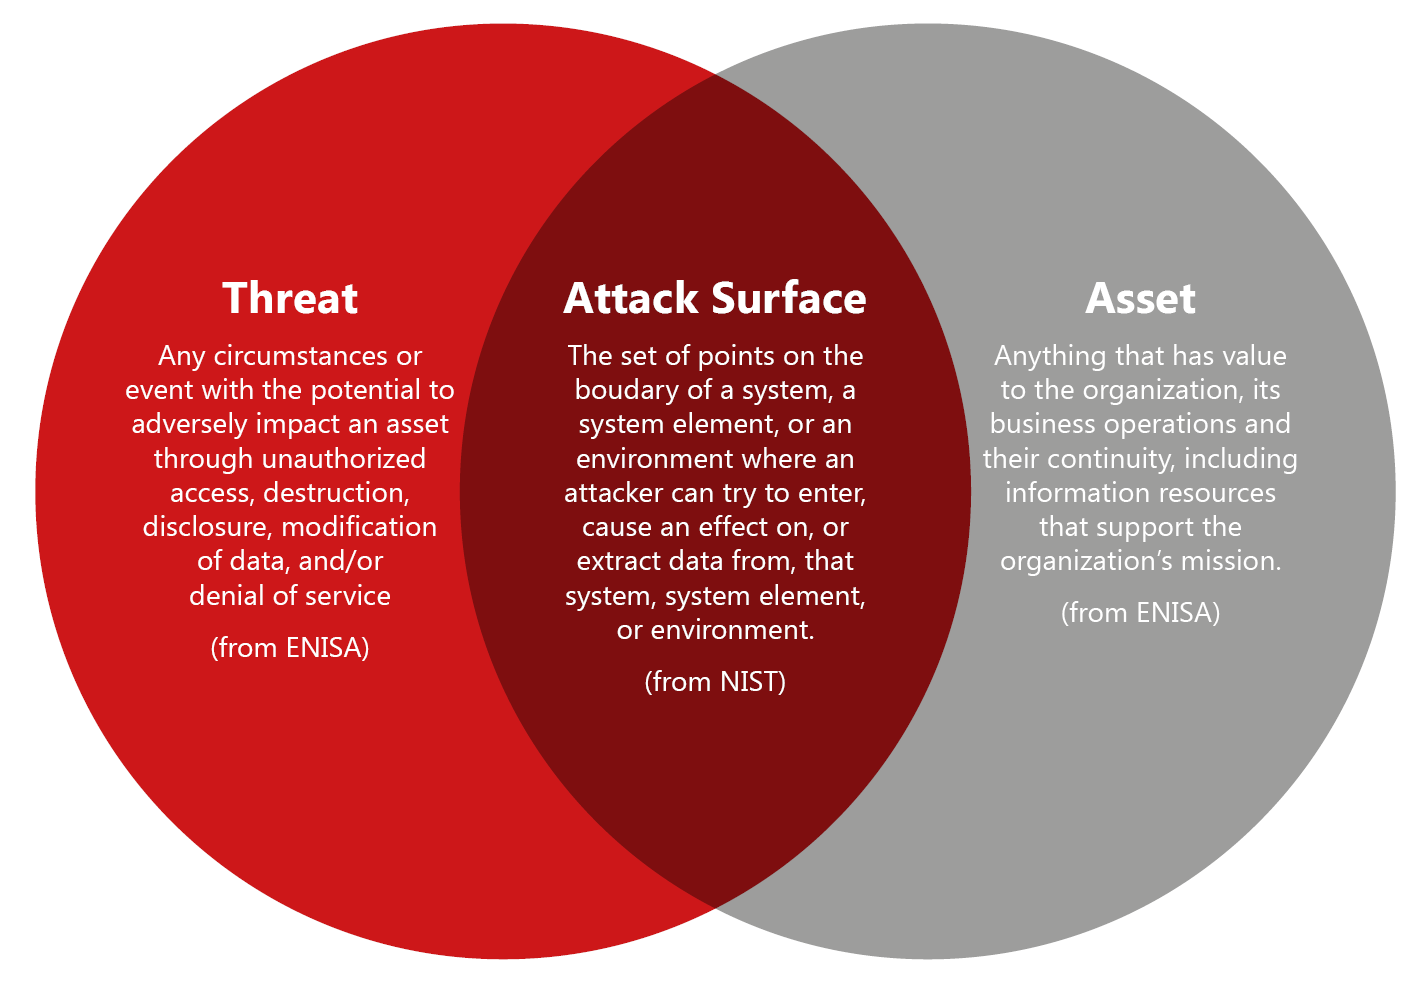 Figure 2 - Attack Surface as defined by NIST